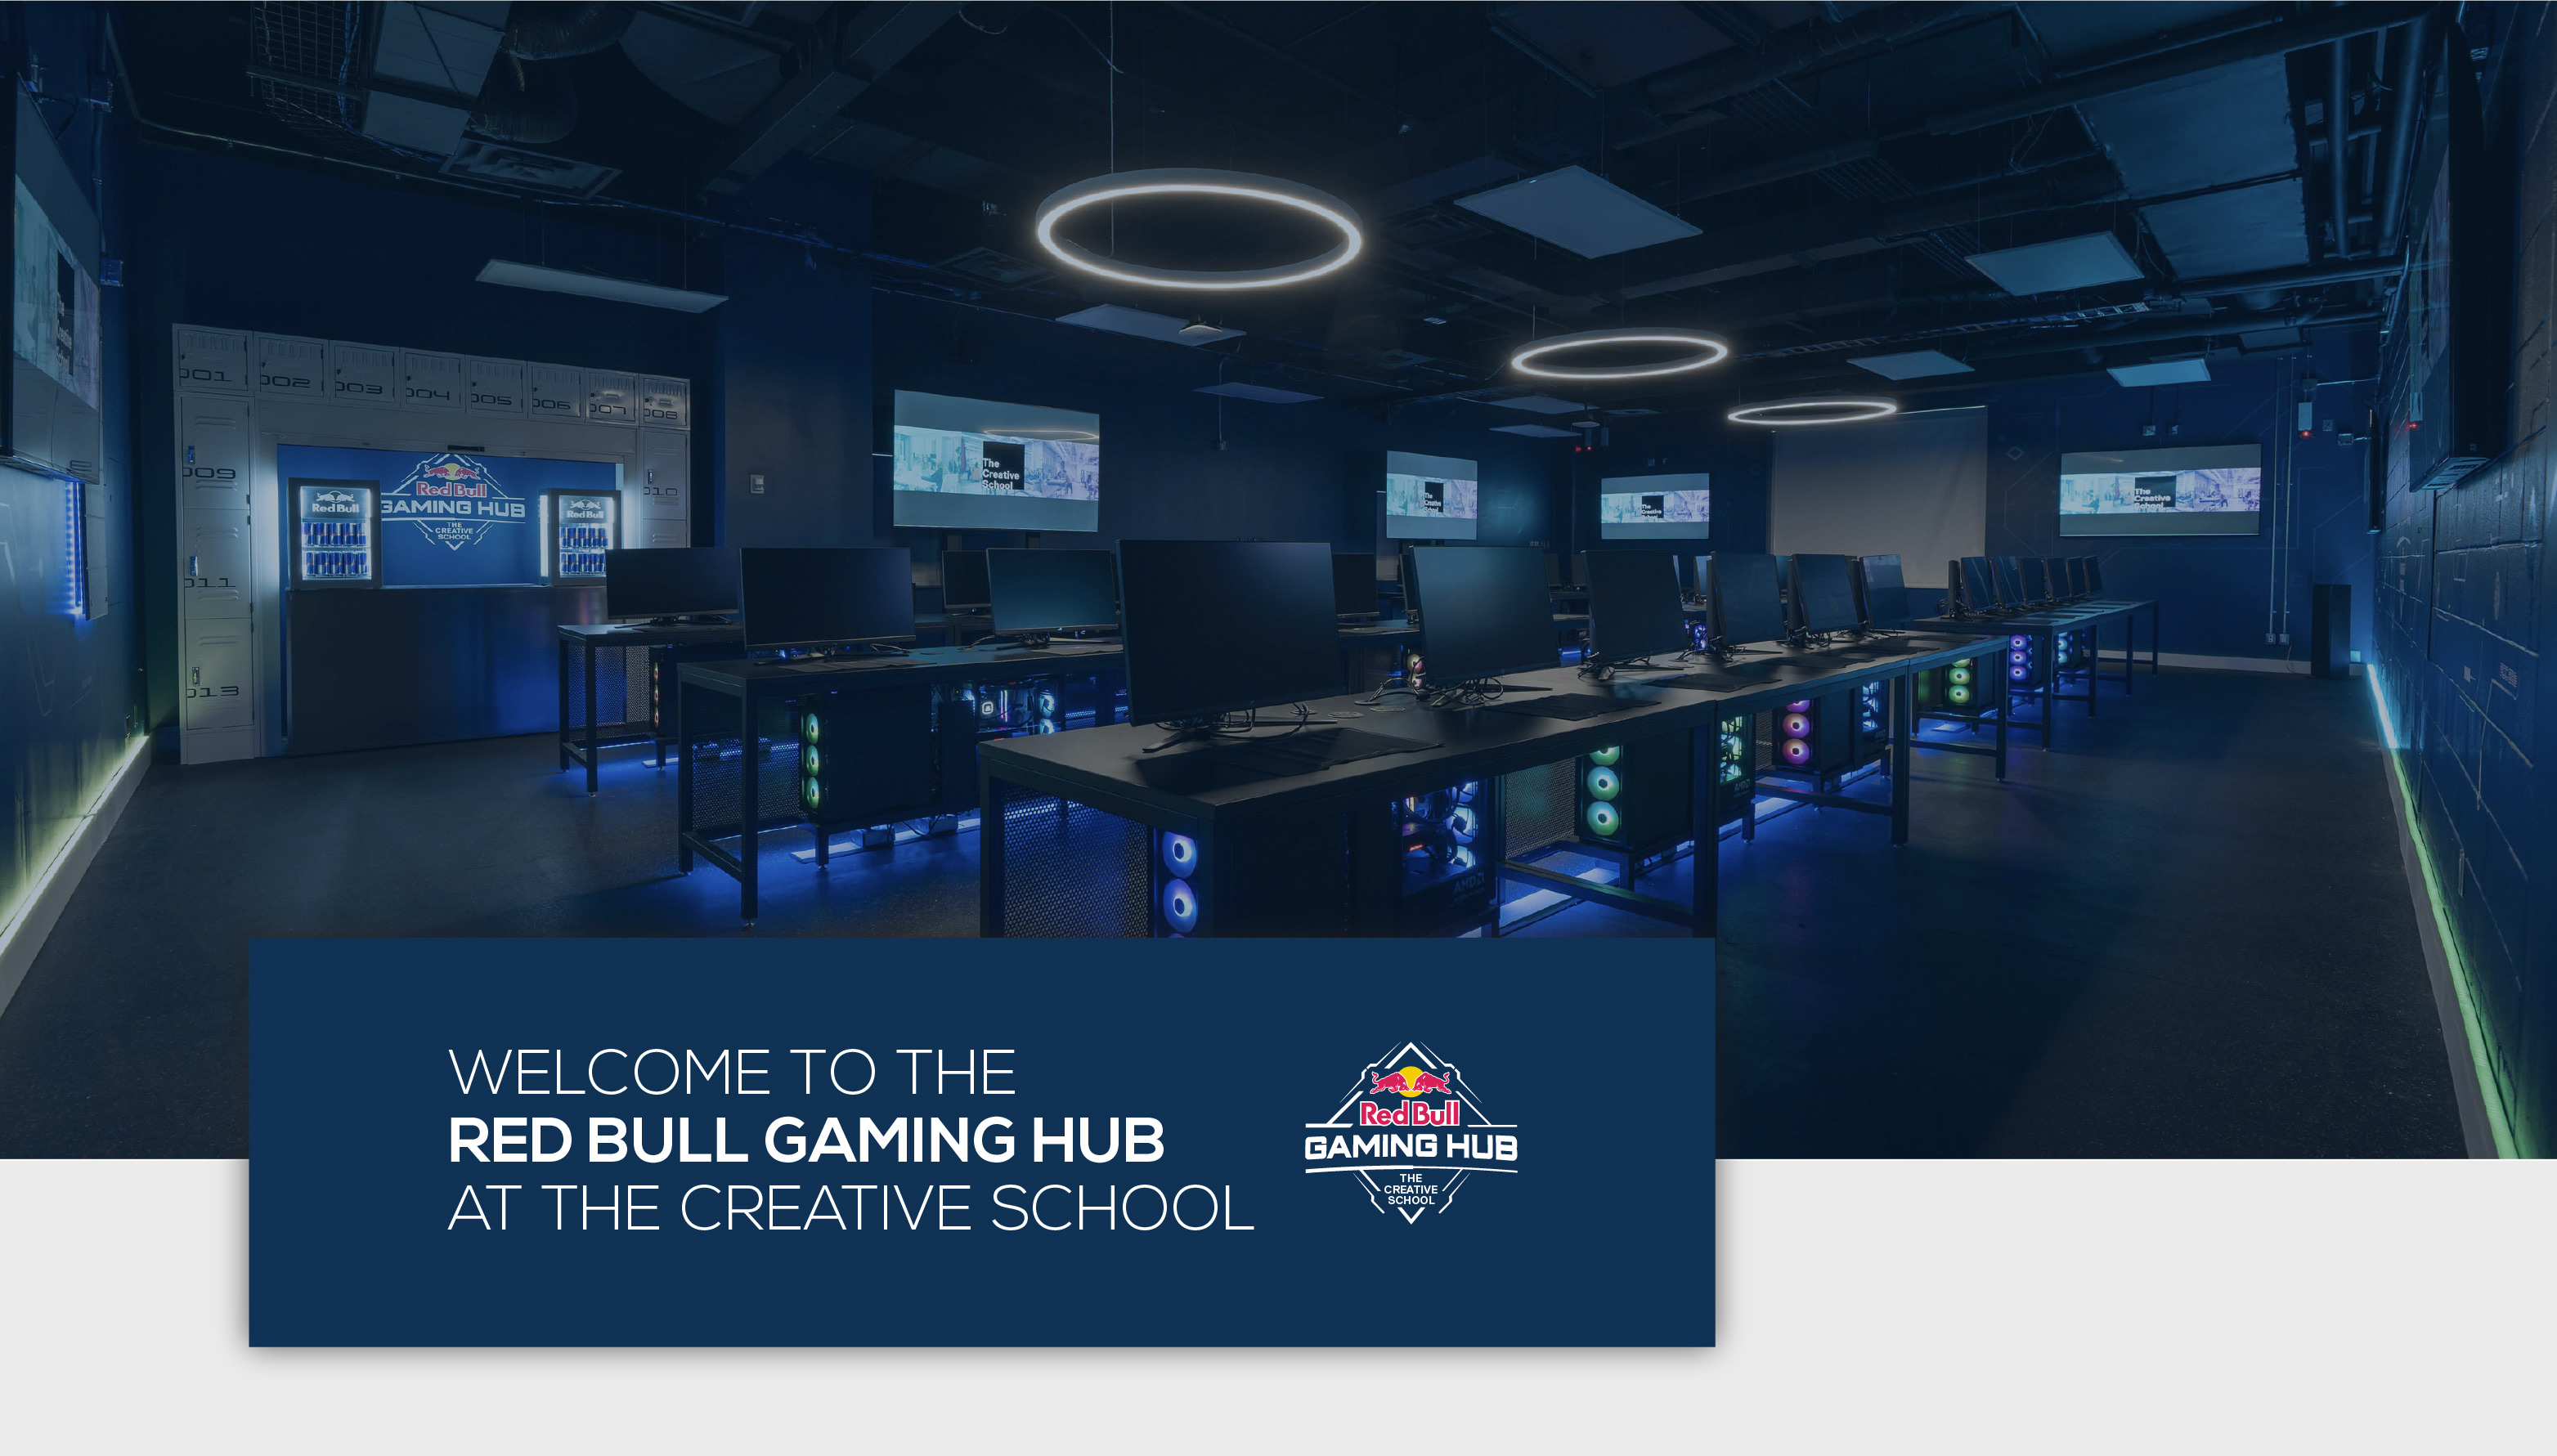 Welcome to the Red Bull Gaming Hub at The Creative School. Multiple high performance gaming computers in the Gaming Hub.